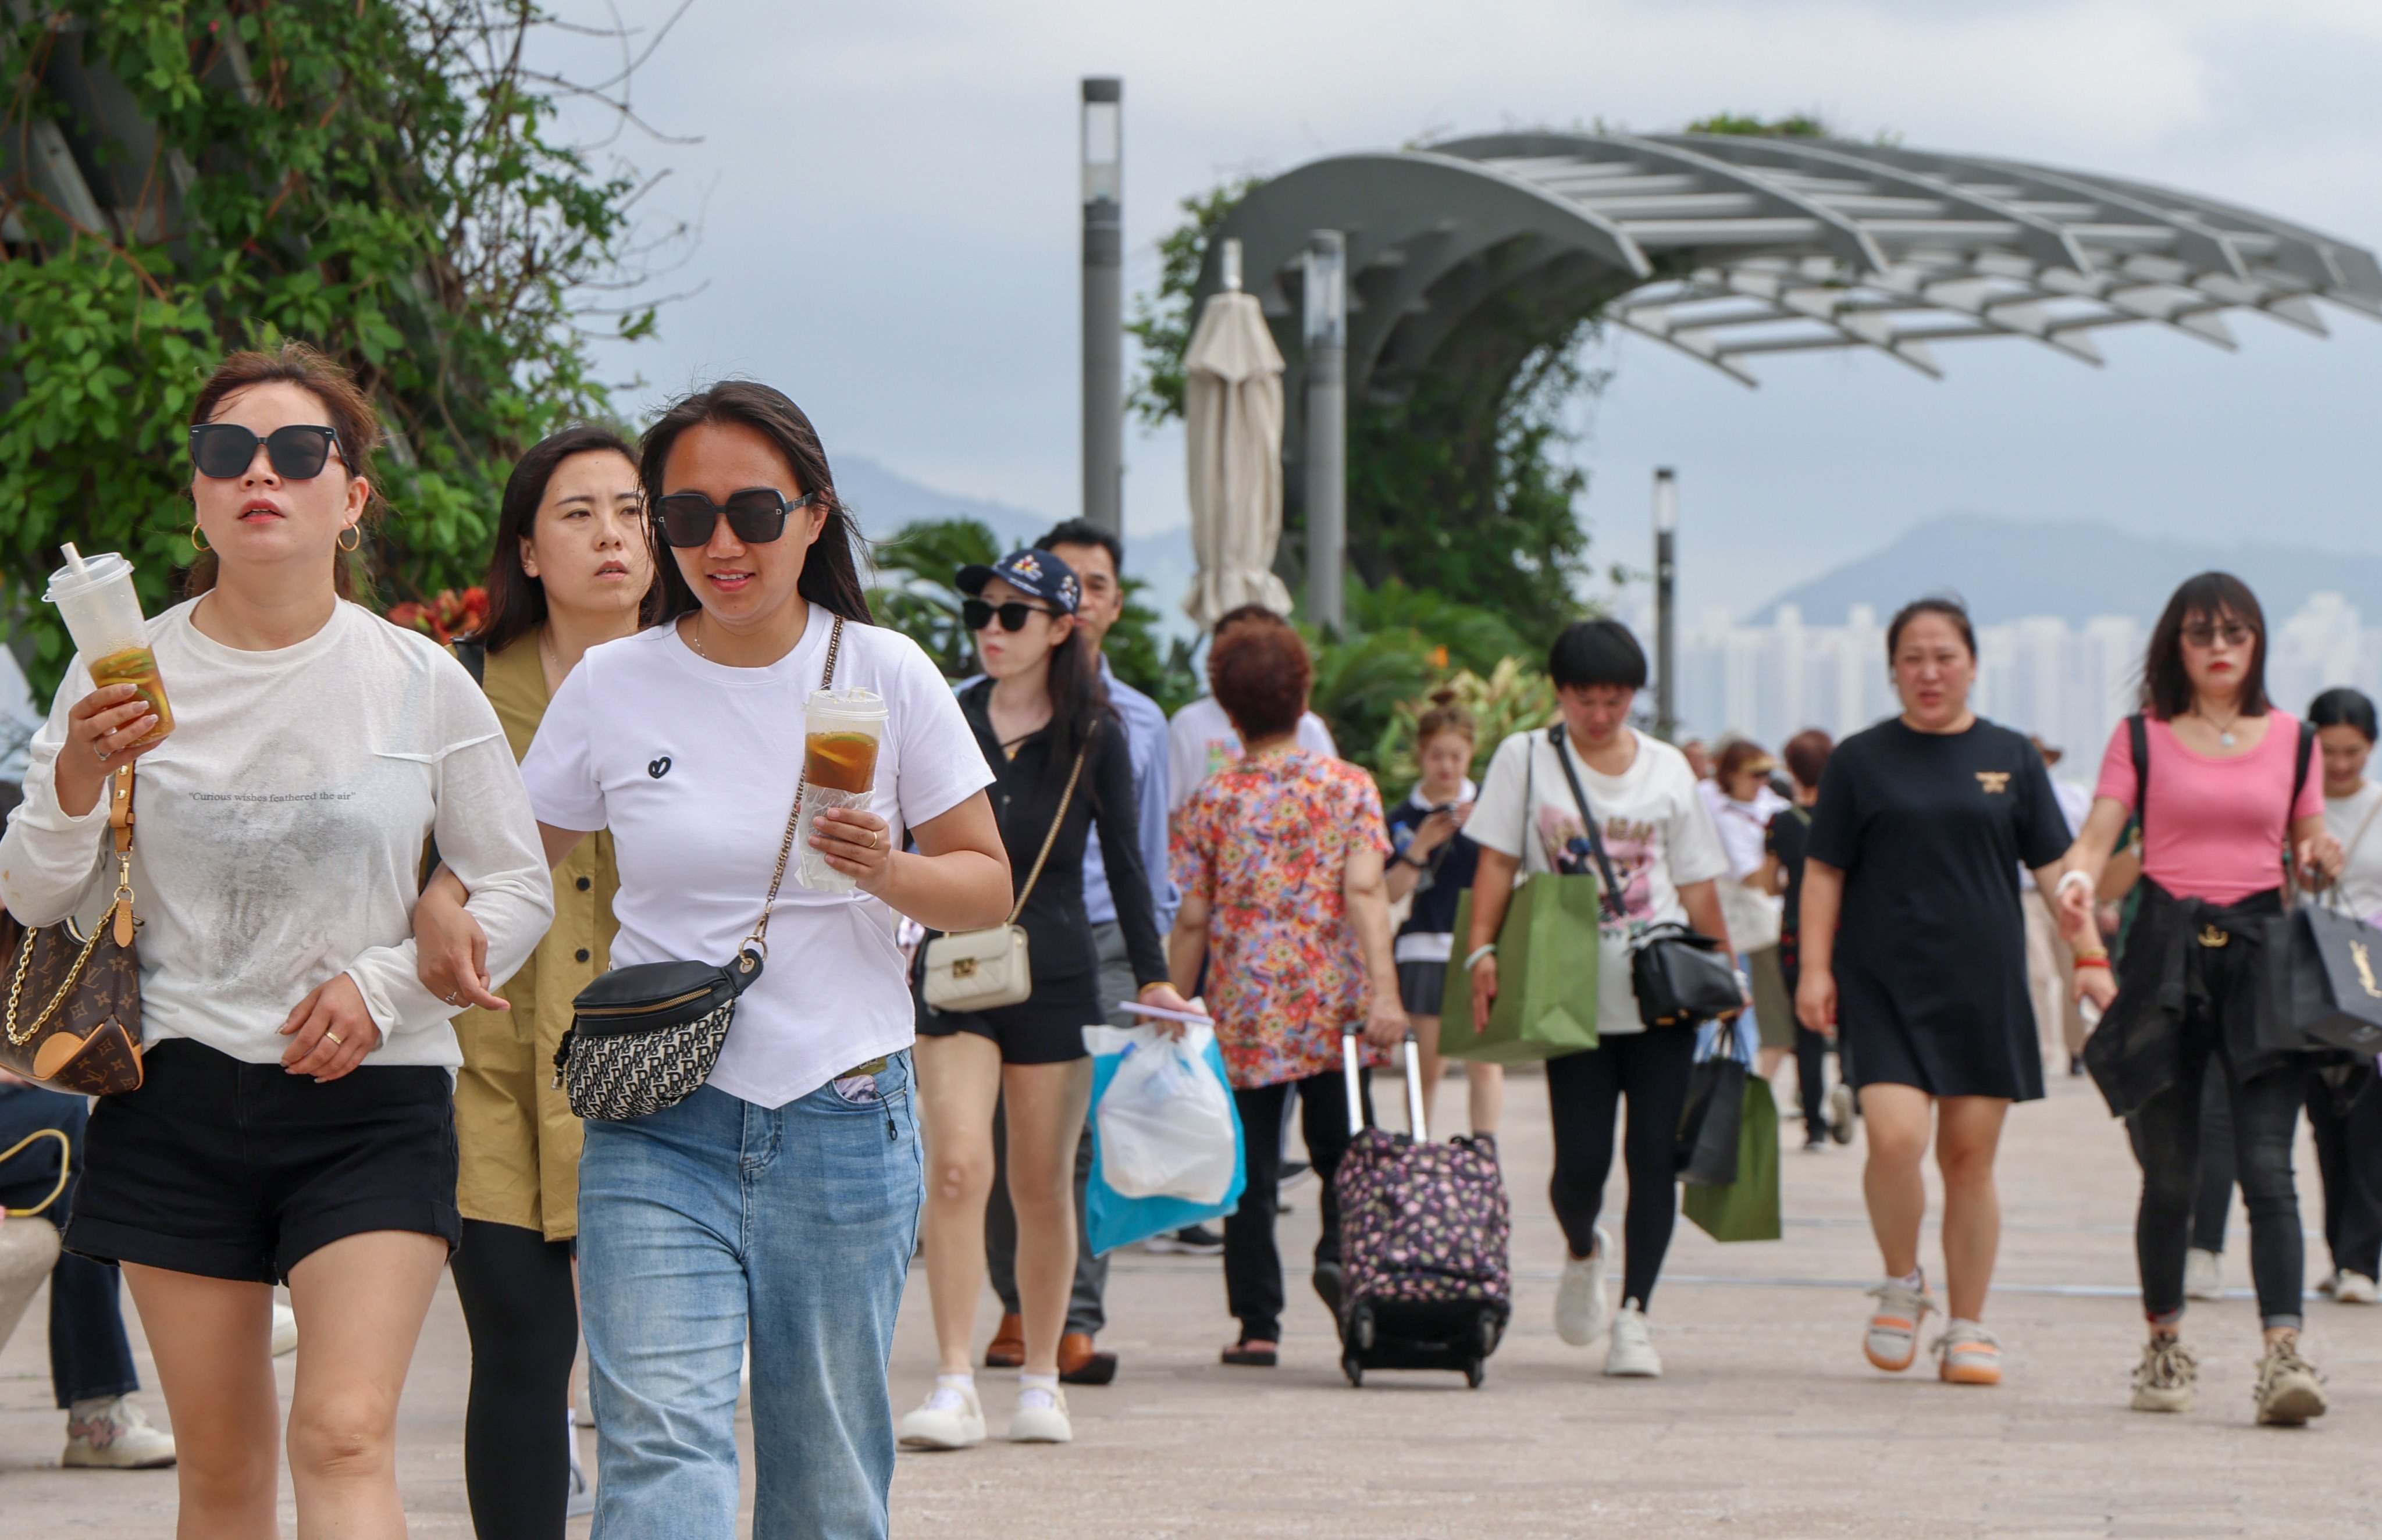 Tourists at Avenue of Stars in Tsim Sha Tsui. The ‘golden week’ holiday is expected to attract an influx of tourists from mainland China to the city. Photo: Jelly Tse